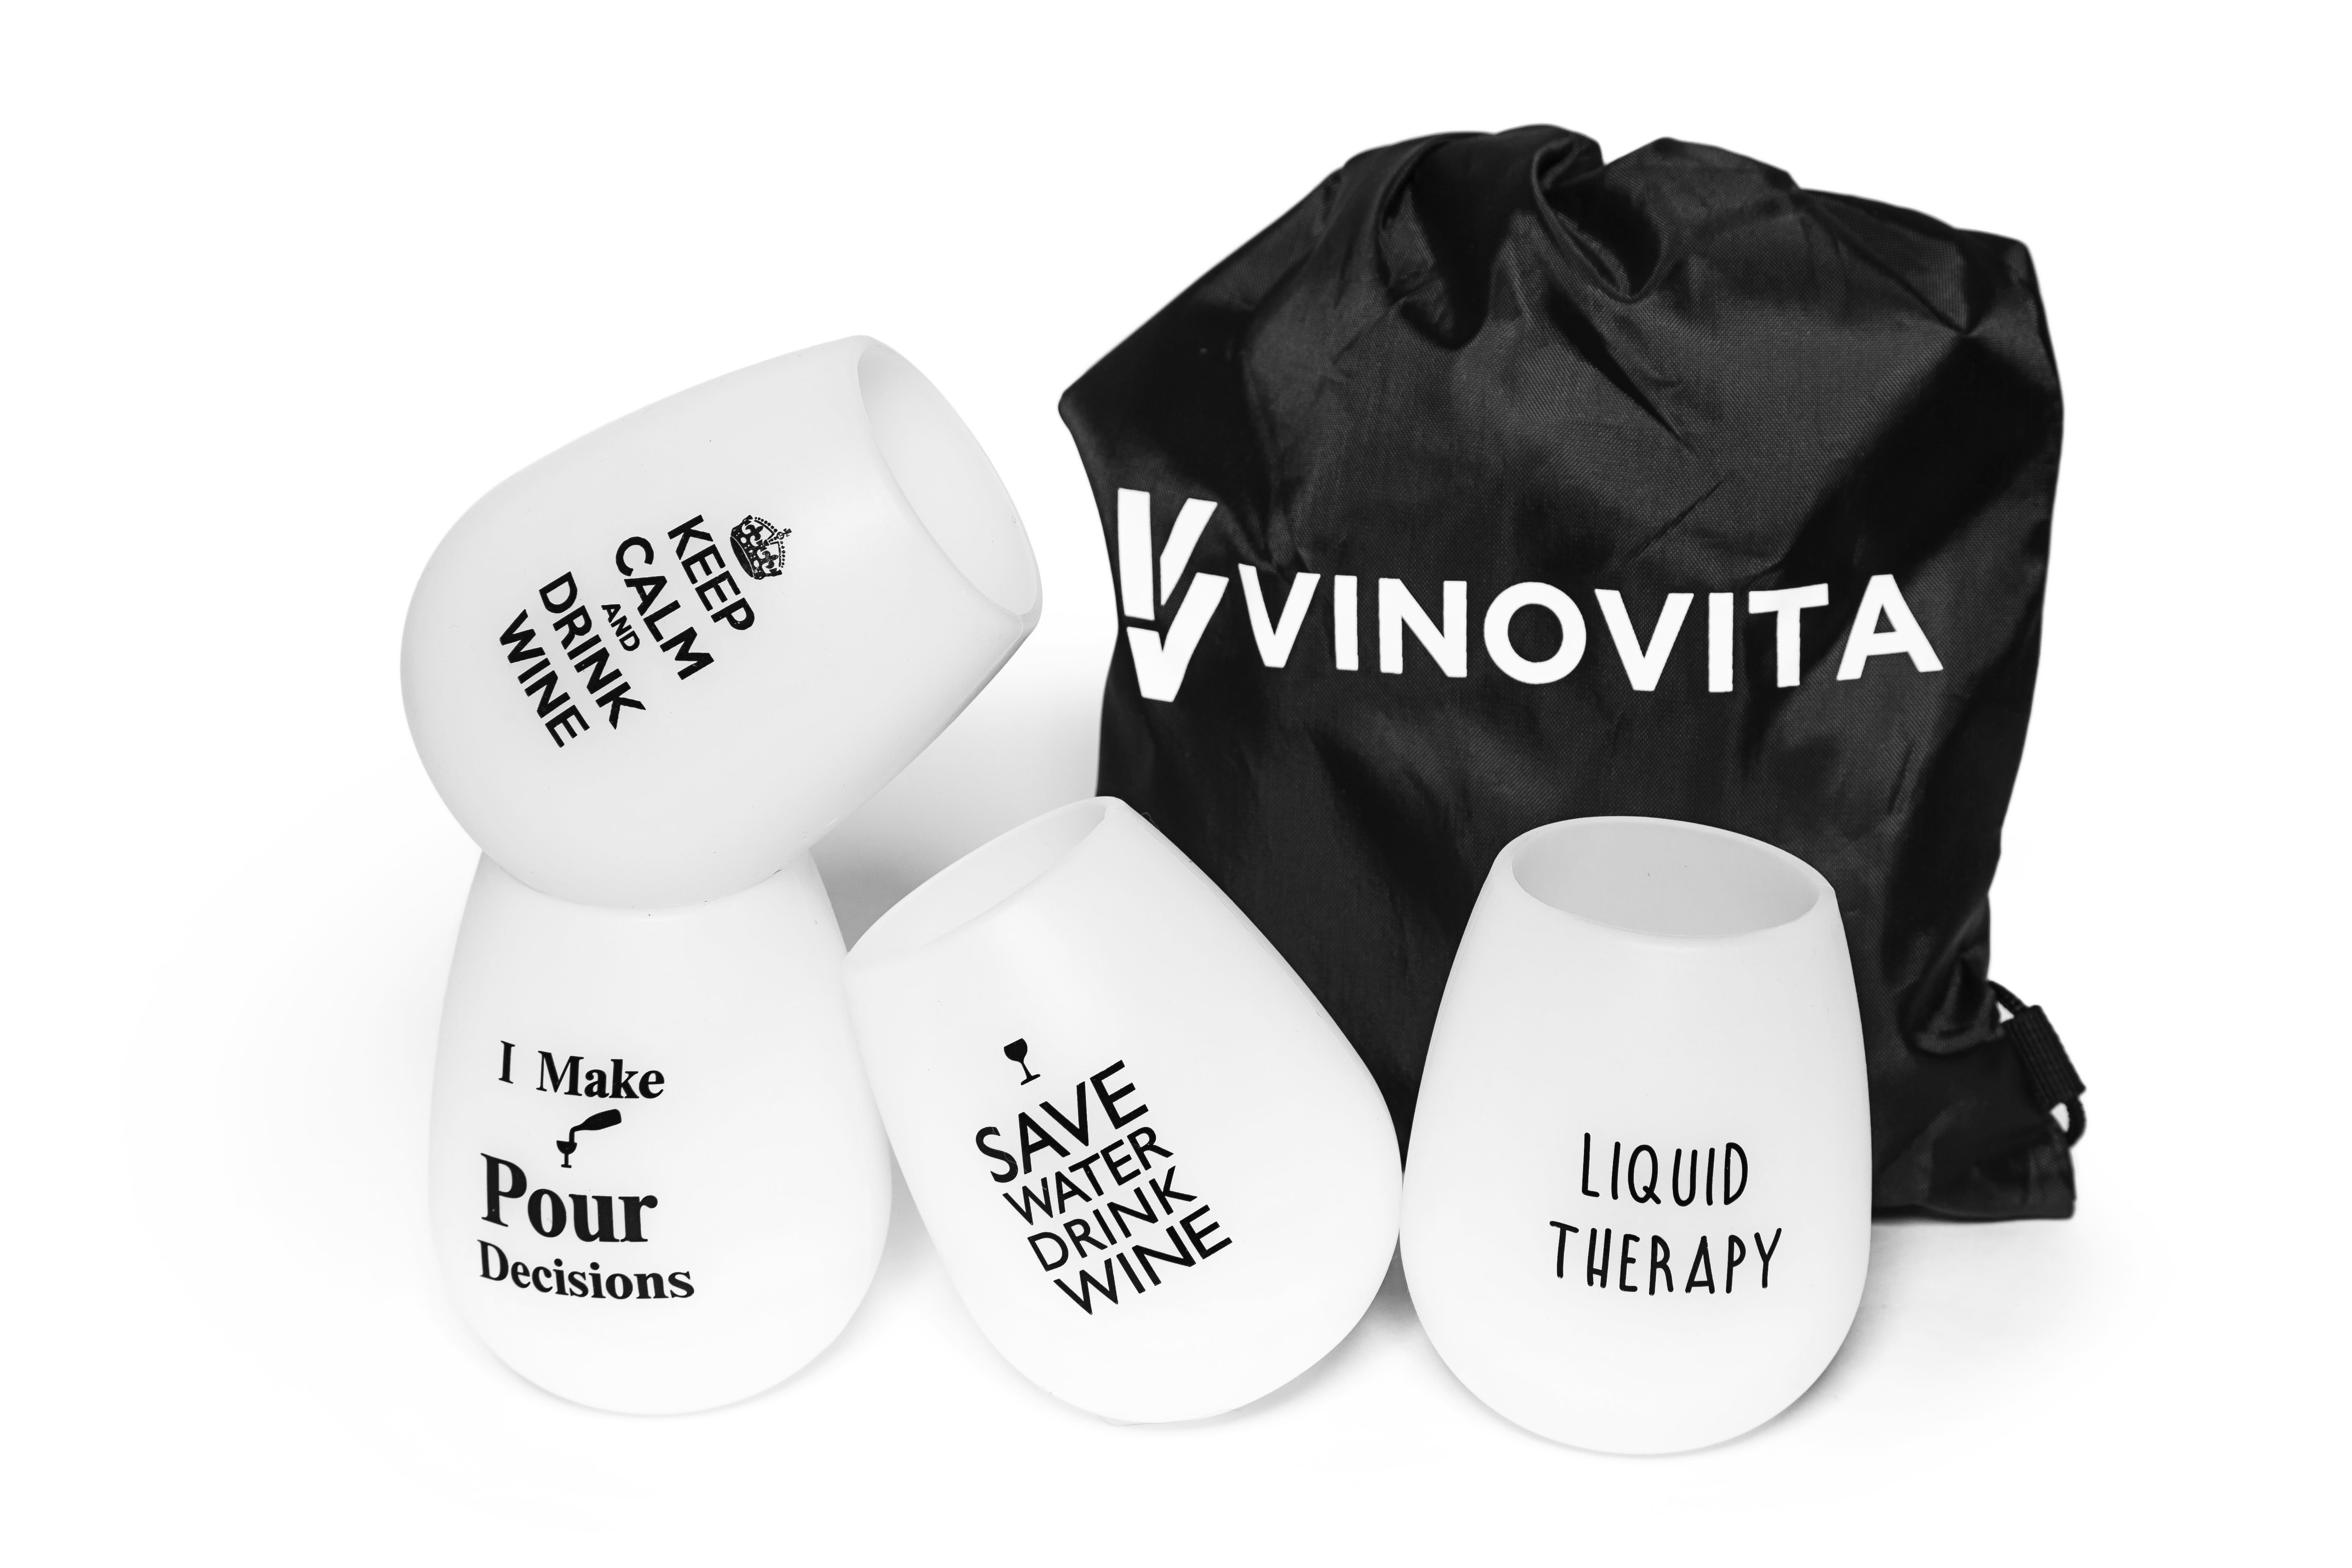 with Bag by Vinovita Unbreakable Rubber 12 oz Silicone Wine Glasses Set of 4